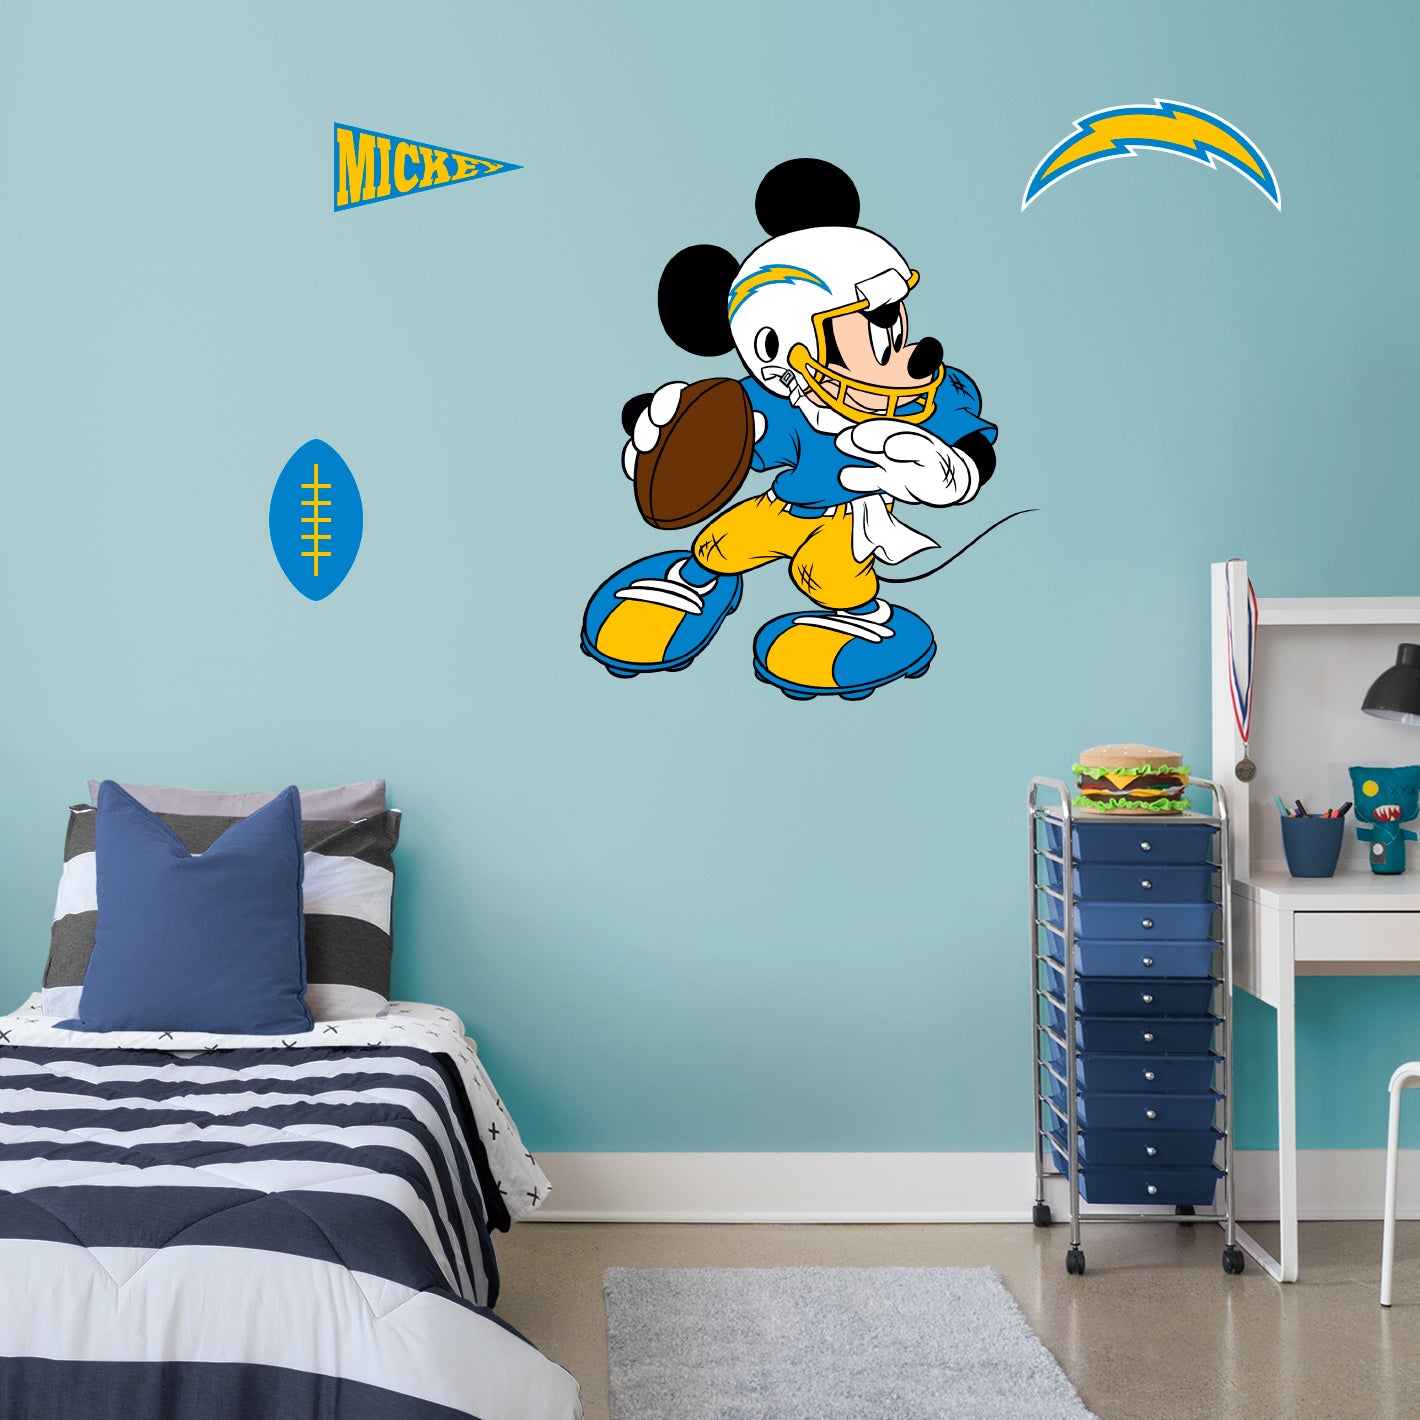 Los Angeles Chargers: Mickey Mouse 2021        - Officially Licensed NFL Removable     Adhesive Decal